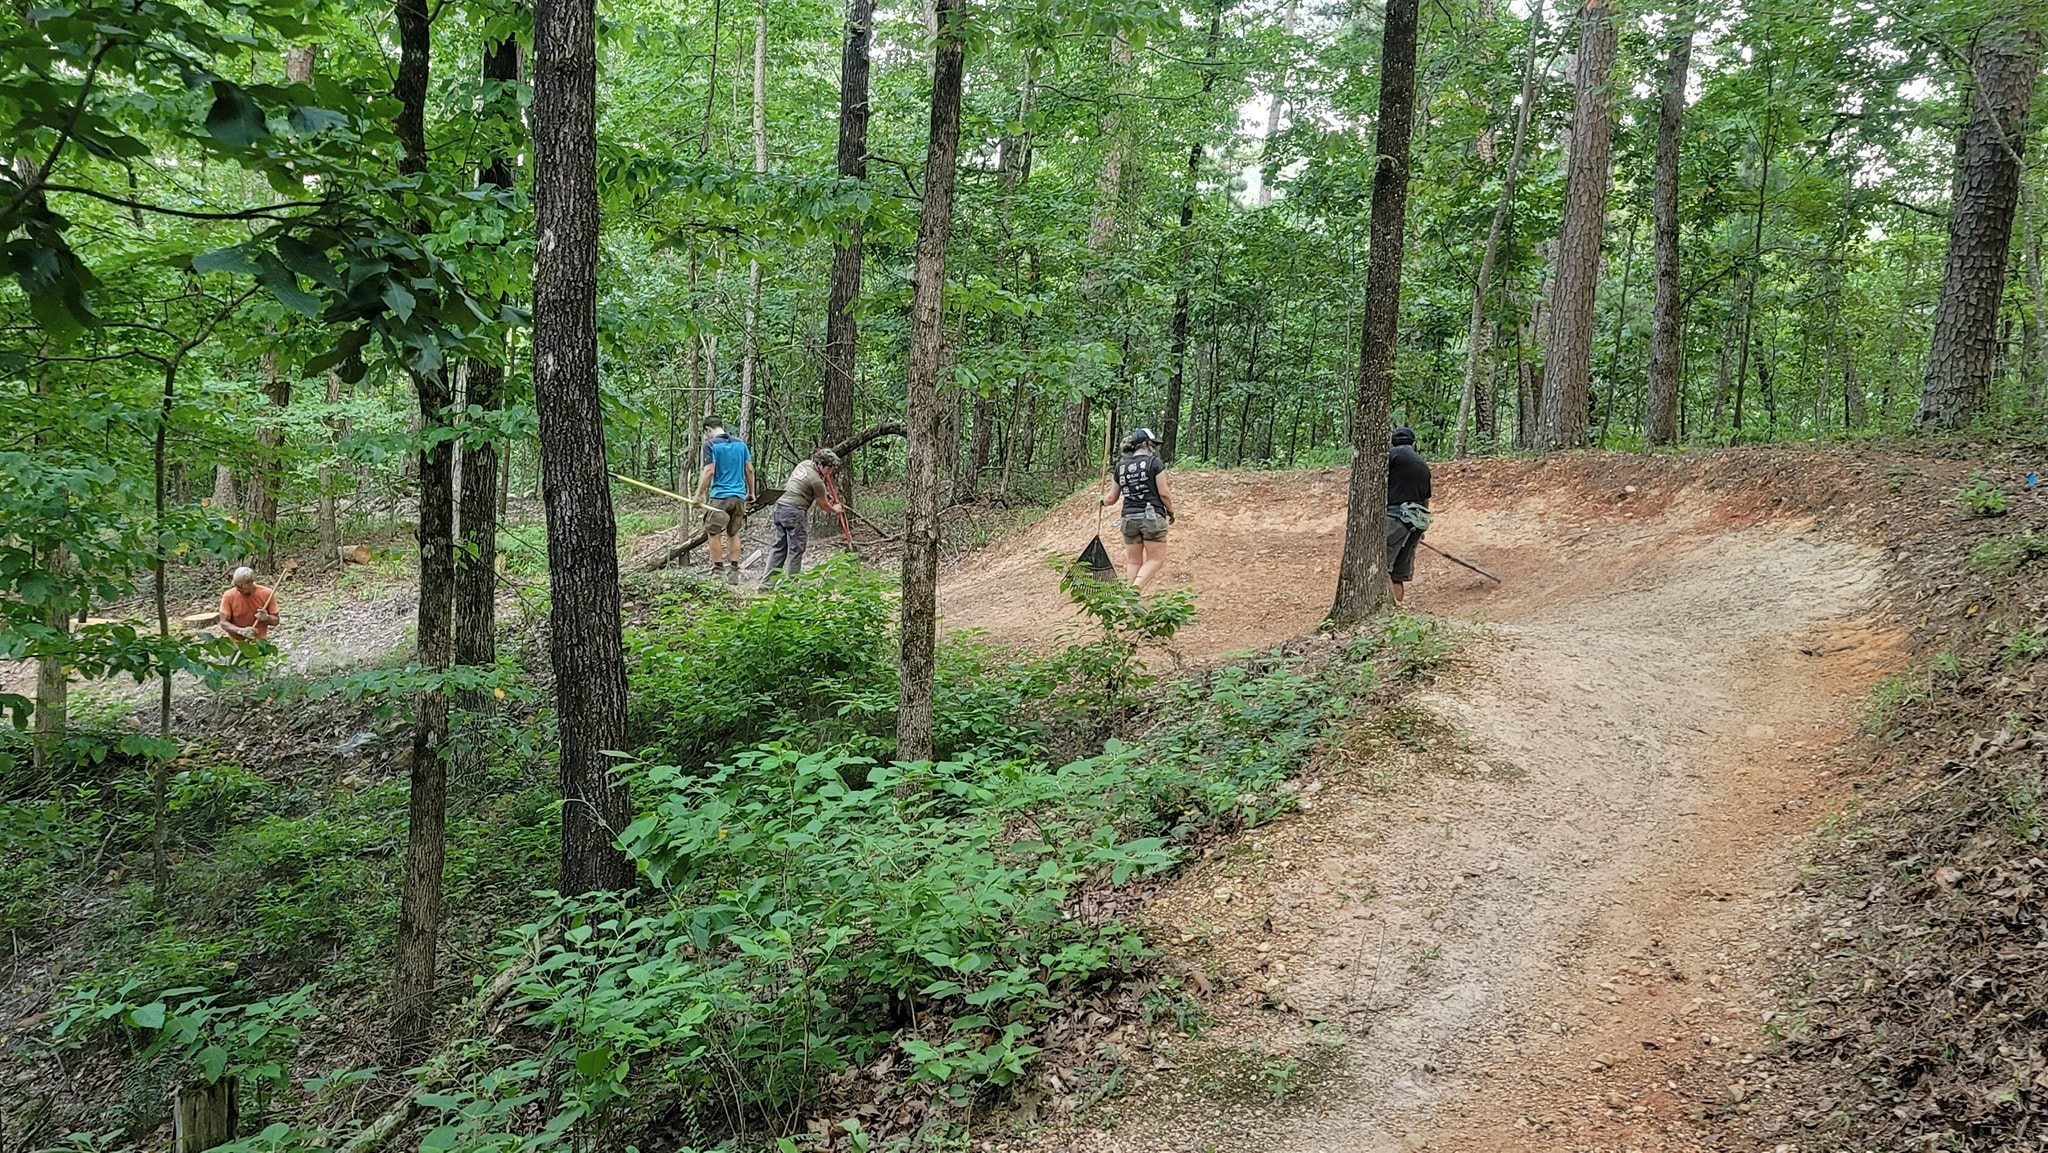 "TACO members during a monthly work day. Photo courtesy of Trail Advocacy Coalition of the Ouachitas."